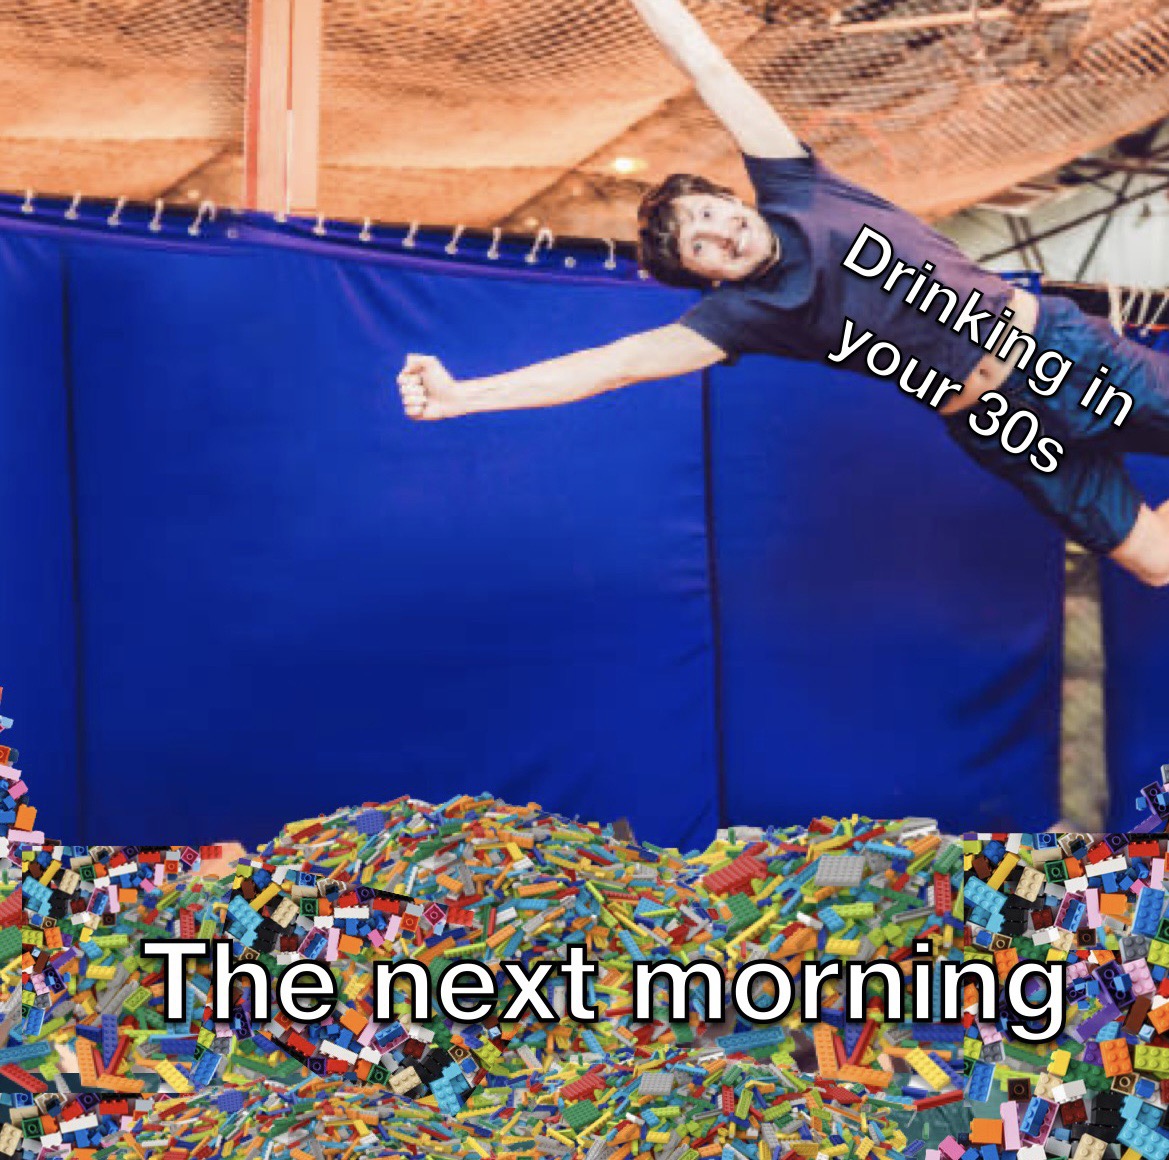 monday morning randomness - jumping into a foam pit - W Drinking in your 30s The next morning